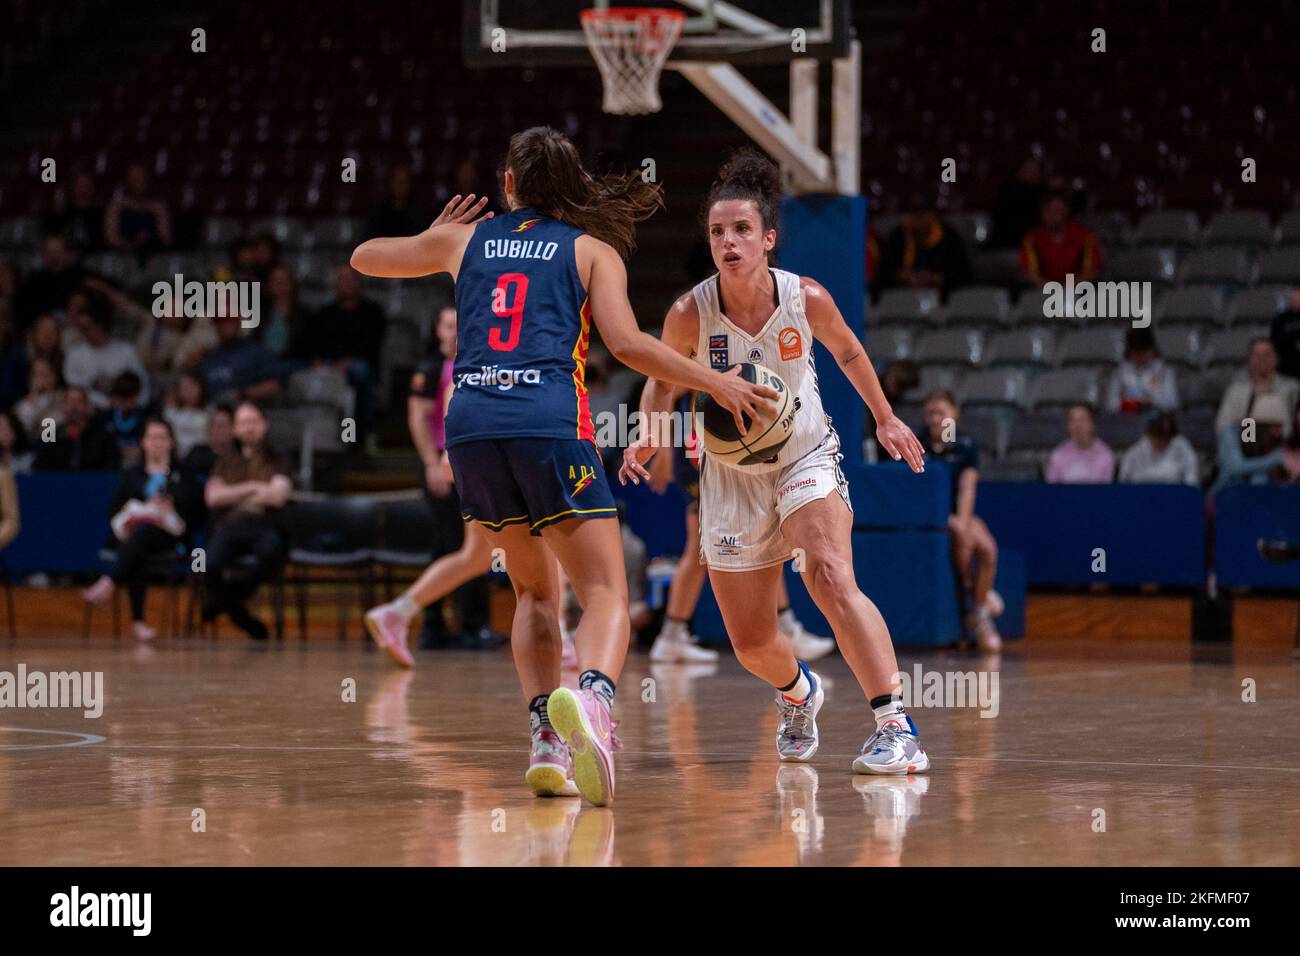 Adelaide, South Australia, November 19th 2022: Abby Cubillo (9 Adelaide Lightning) is defended by Vanessa Panousis (9 Sydney Flames) during the Cygnett WNBL game between Adelaide Lightning and Sydney Flames at Adelaide 36ers Arena in Adelaide, Australia.  (Noe Llamas/SPP) Stock Photo